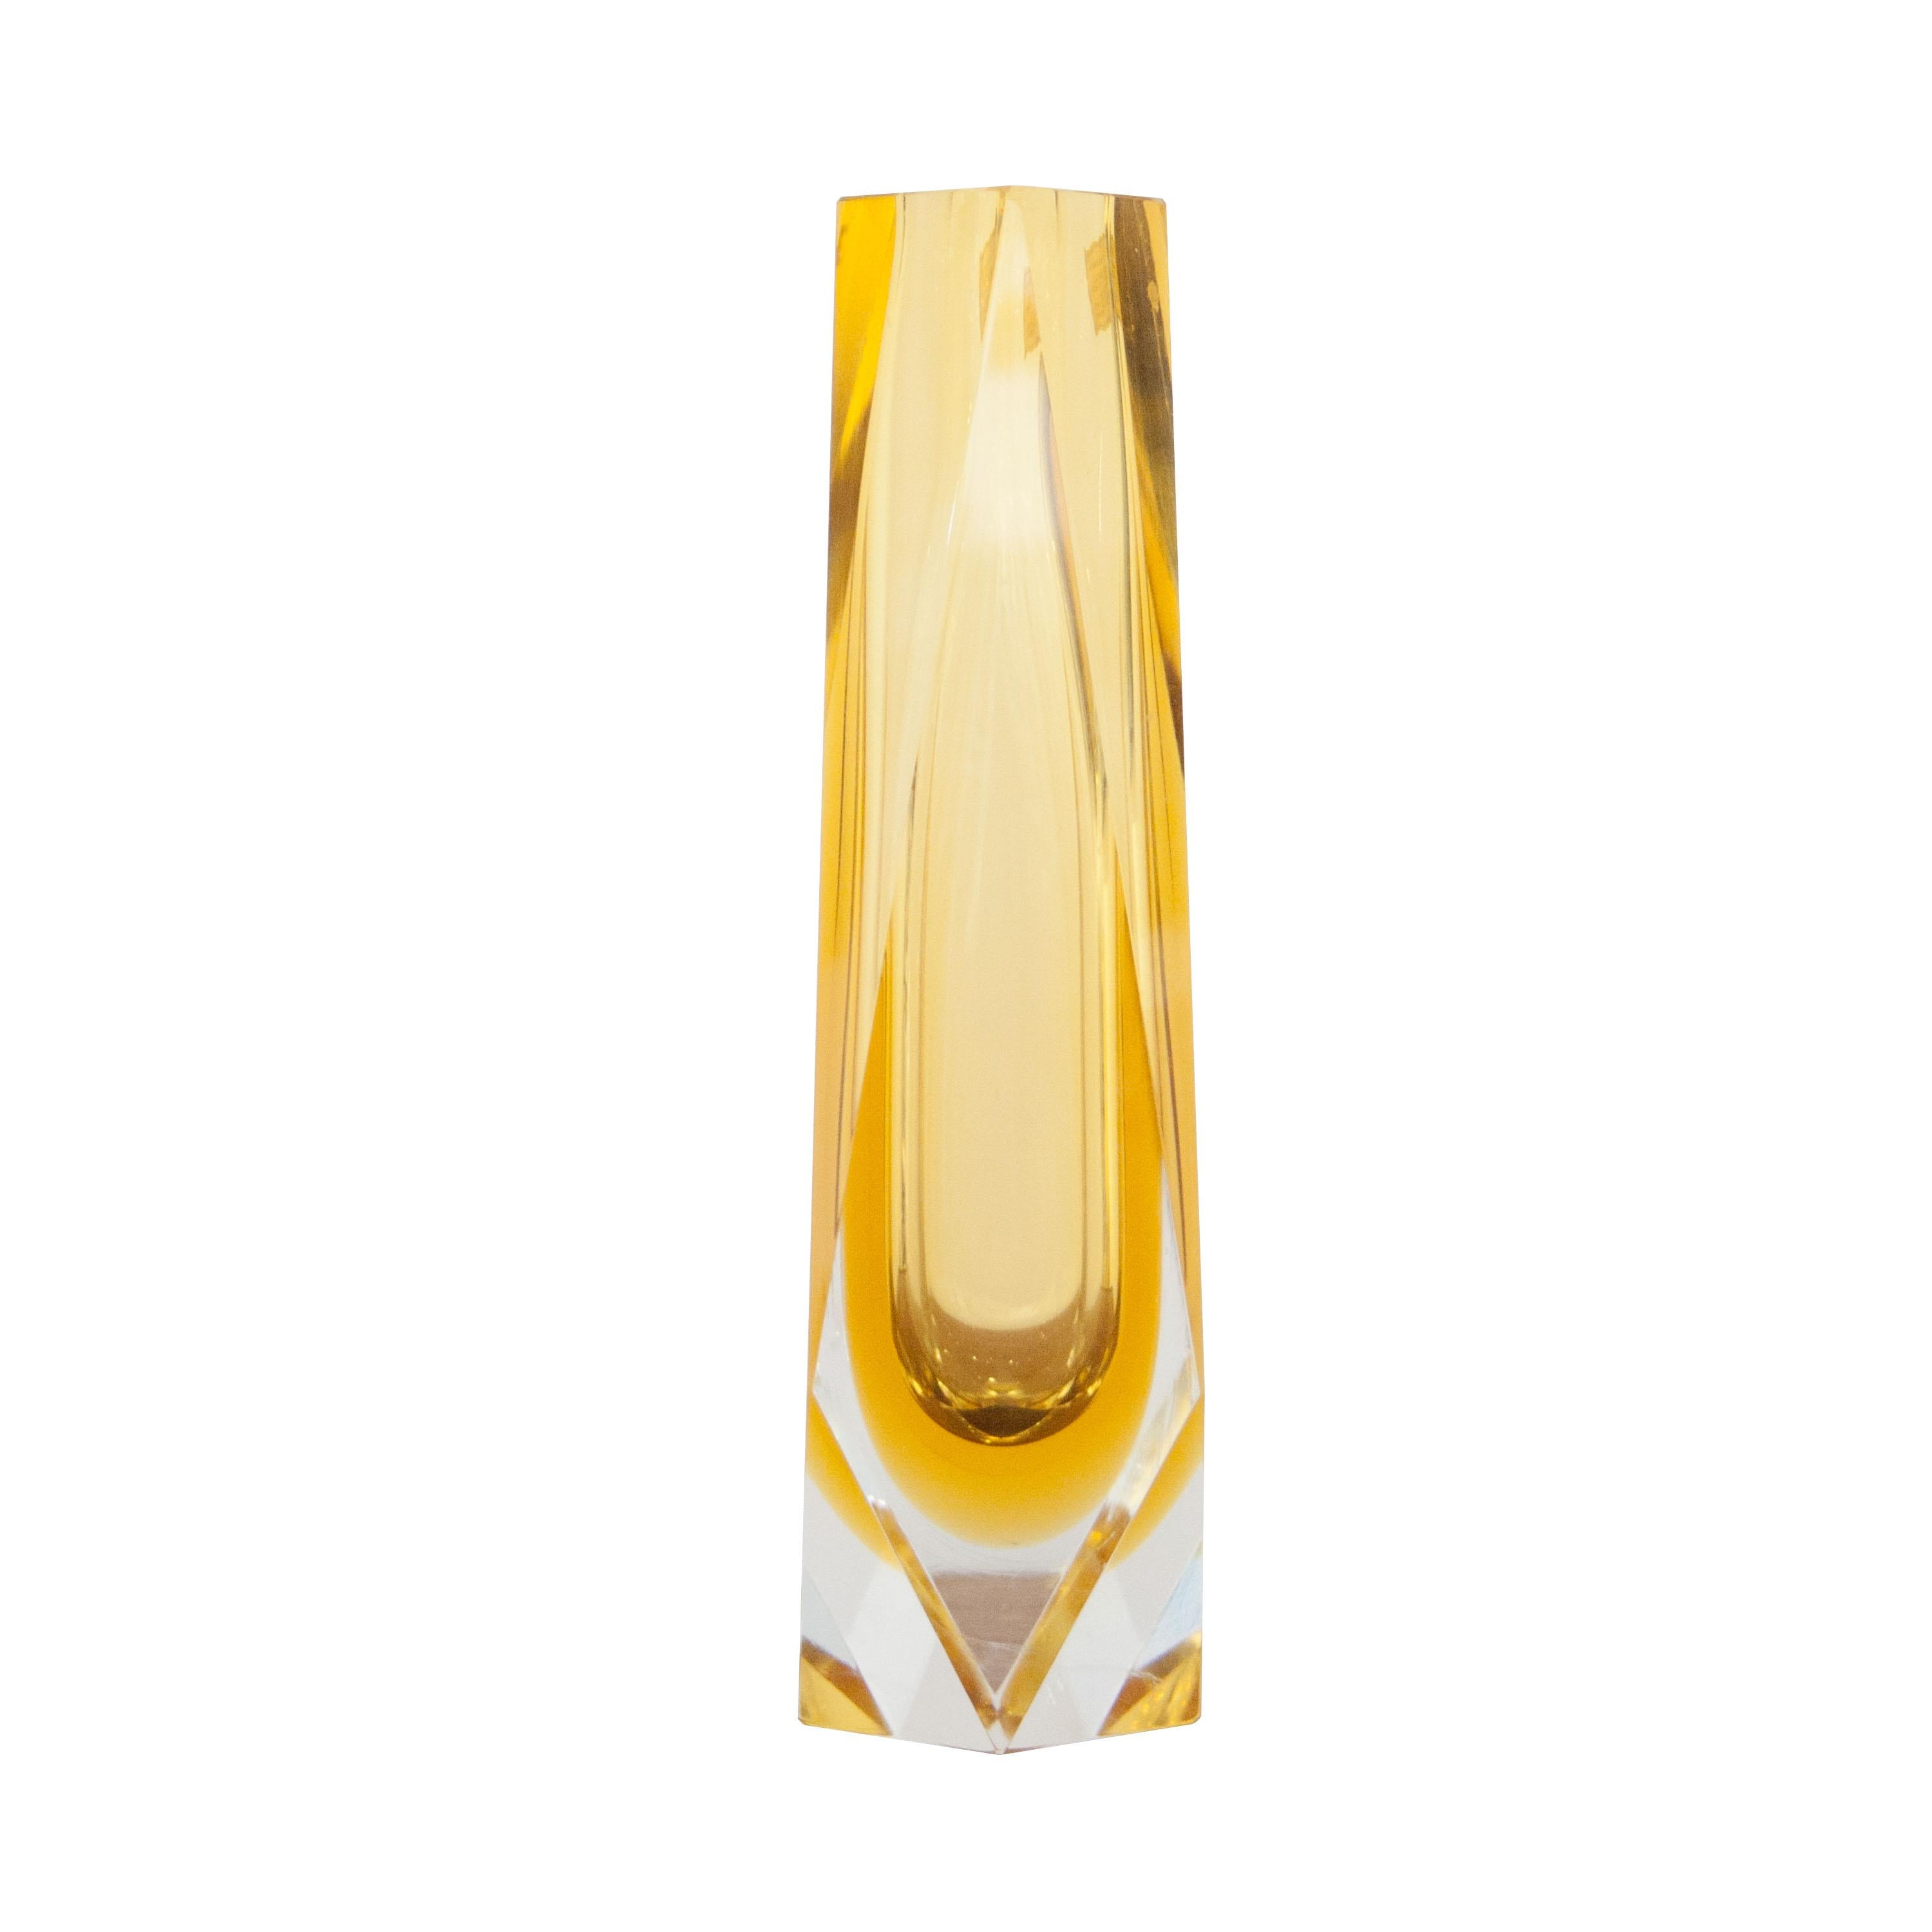 Italian vase designed by Flavio Poli and edited by Mandruzzato. Hand-crafted faceted Murano glass in yellow.